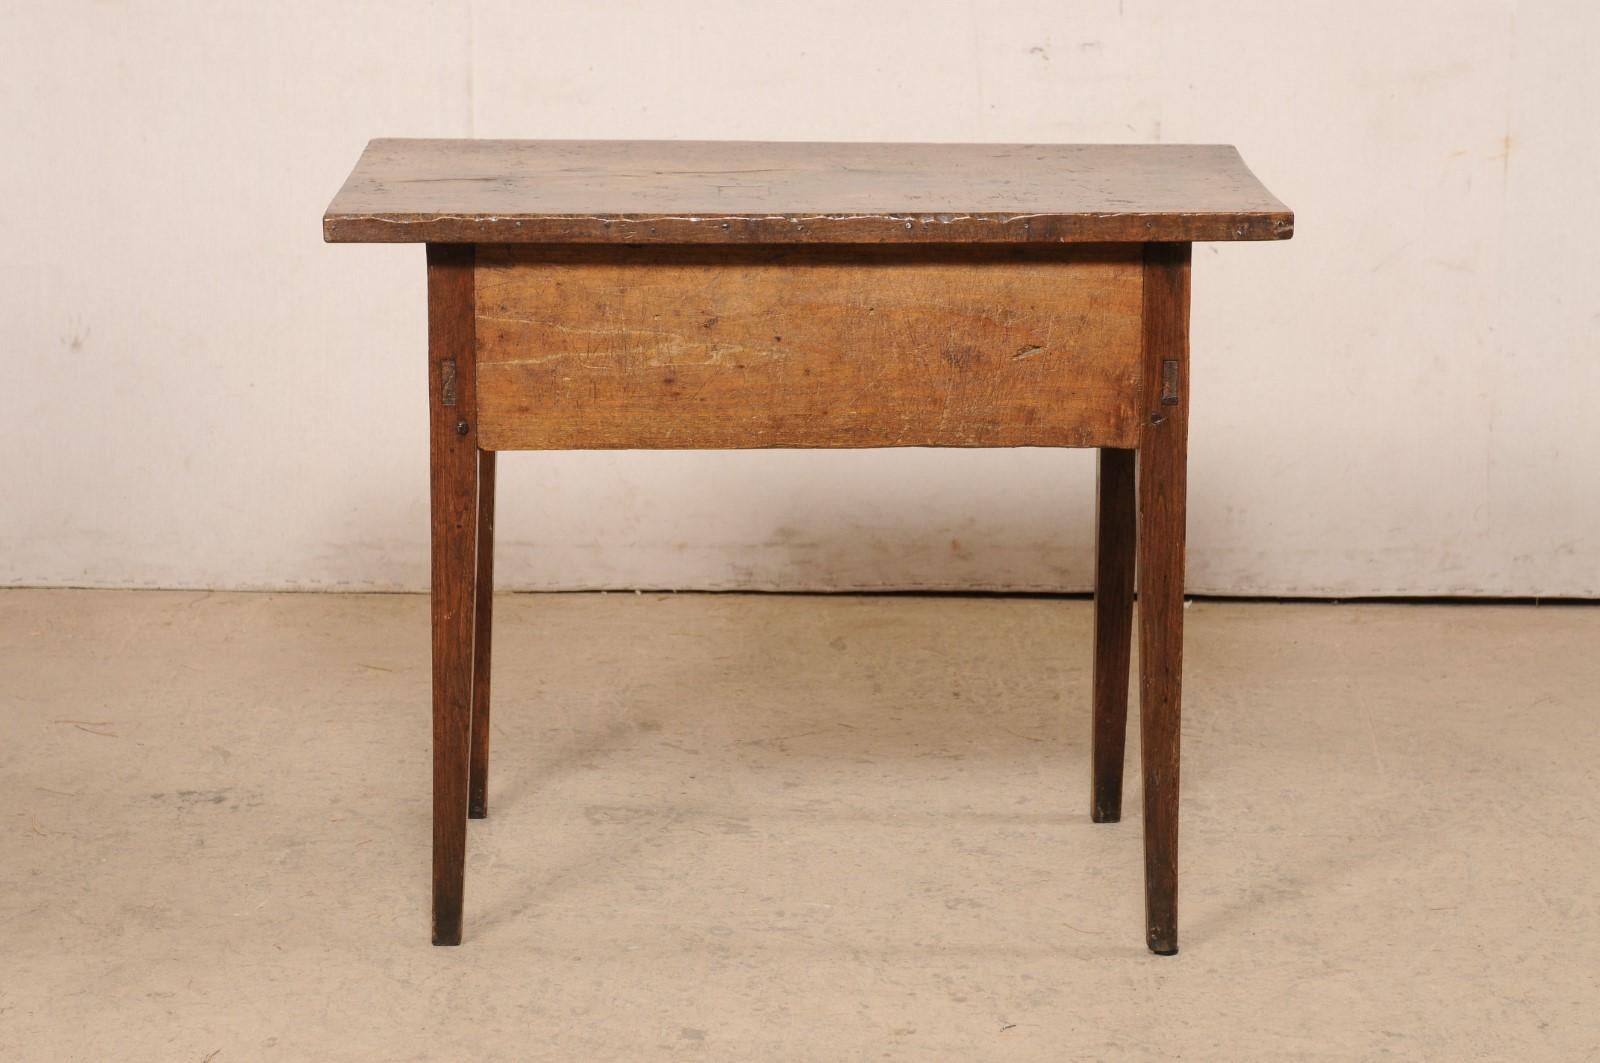 18th C. Spanish Carved-Walnut Table w/Drawer (Top has Fabulous Old Patina!) For Sale 4